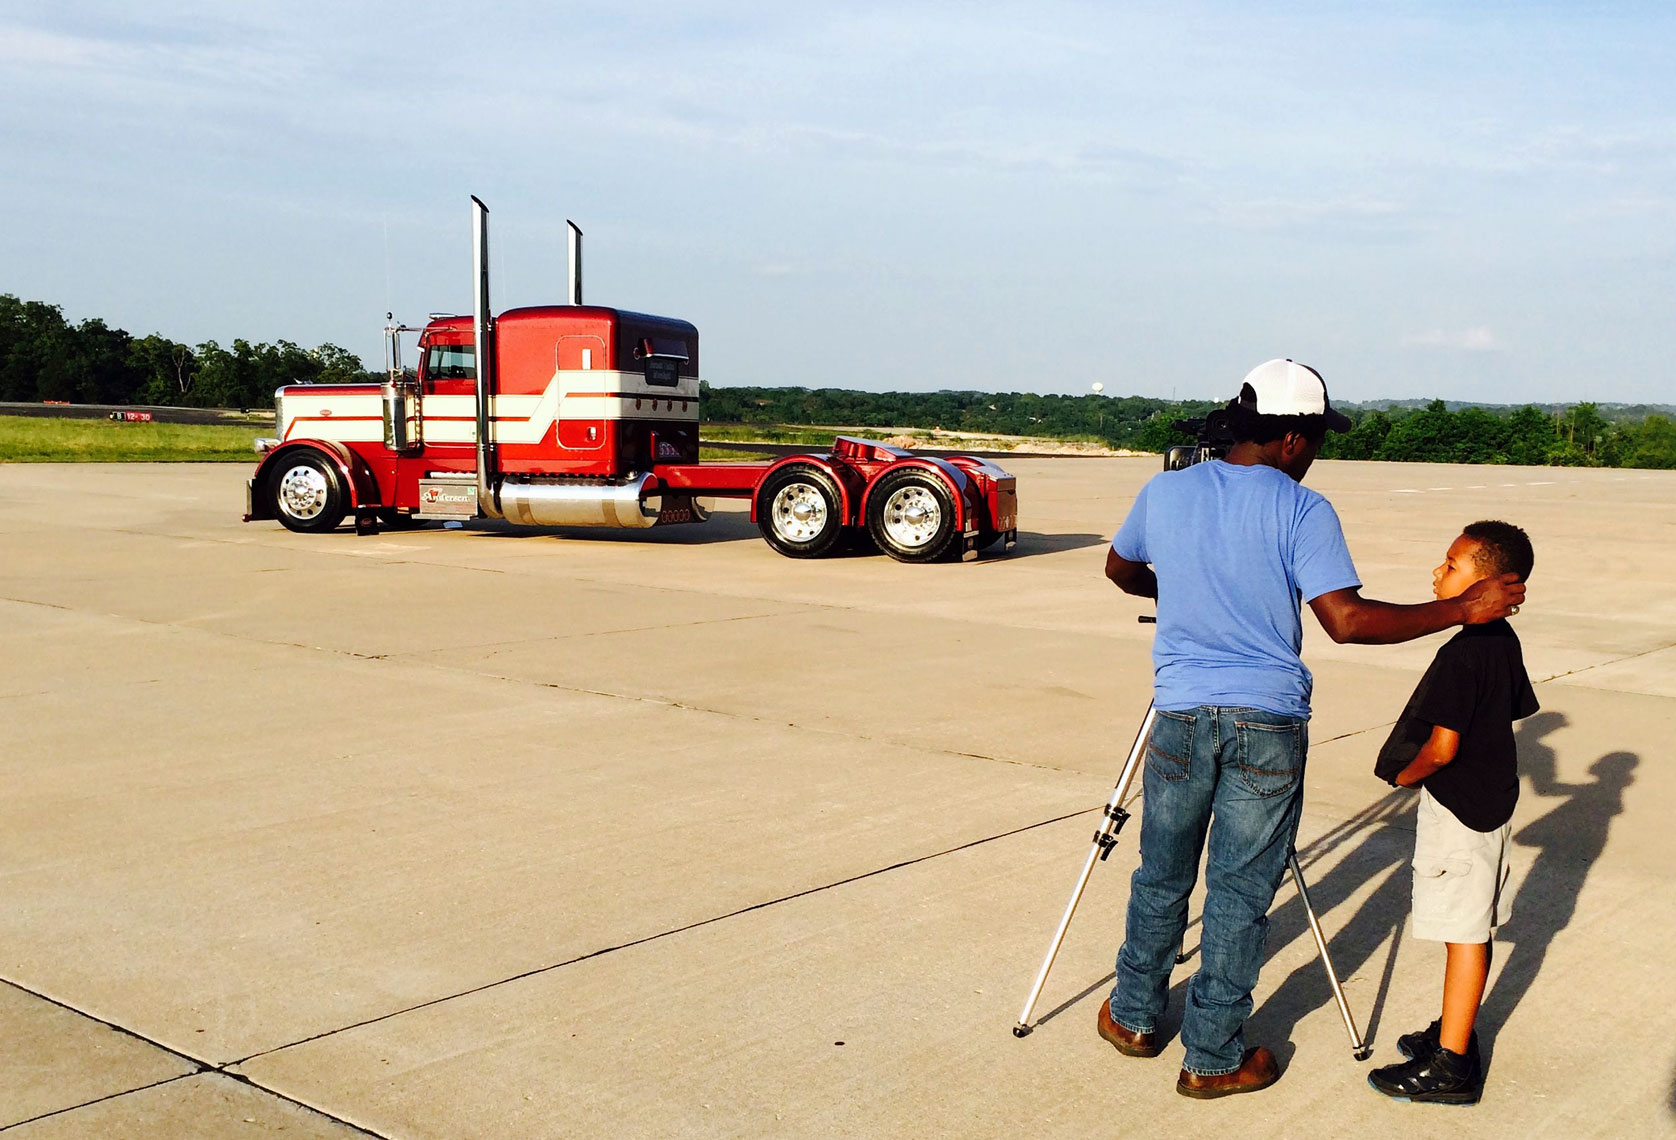 Commercial Trucking Photography - Roger Snider - Big Rig Videos Creator - Branson MO